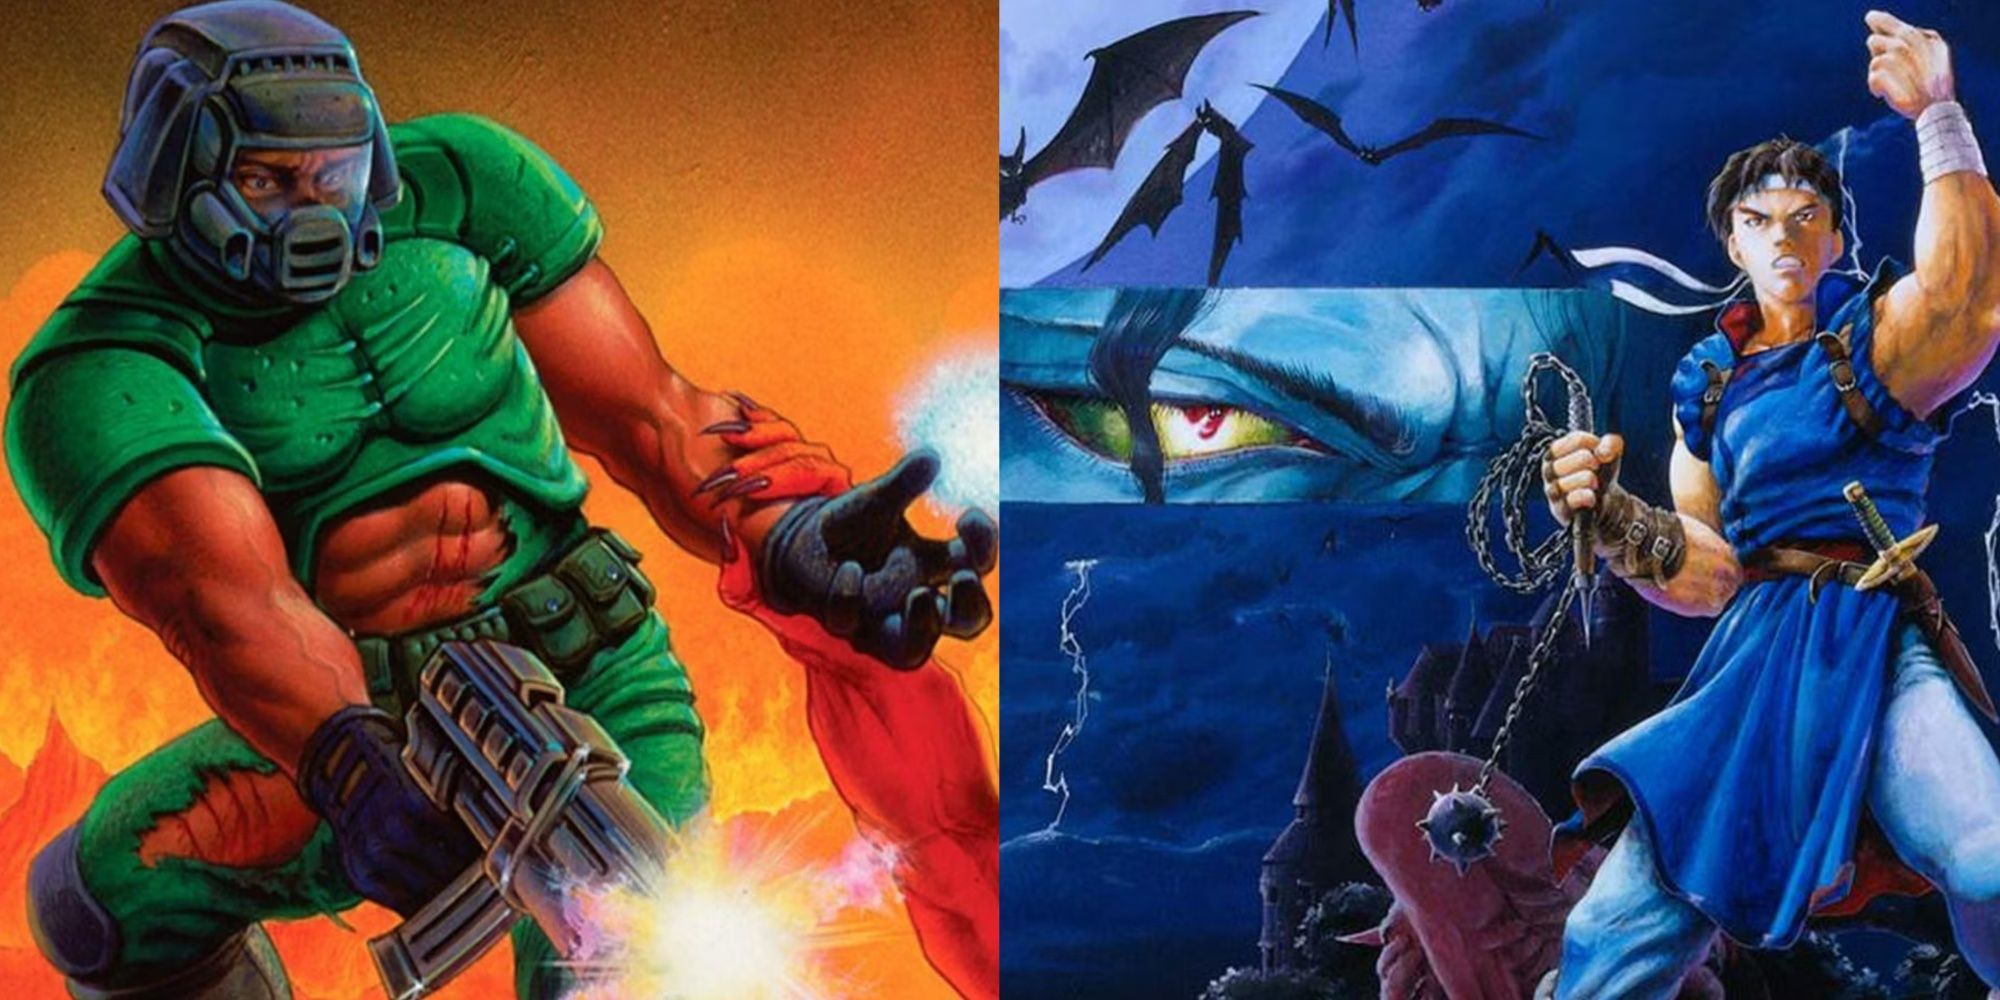 Box art for Doom 1993 and Castlevania Rondo of Blood